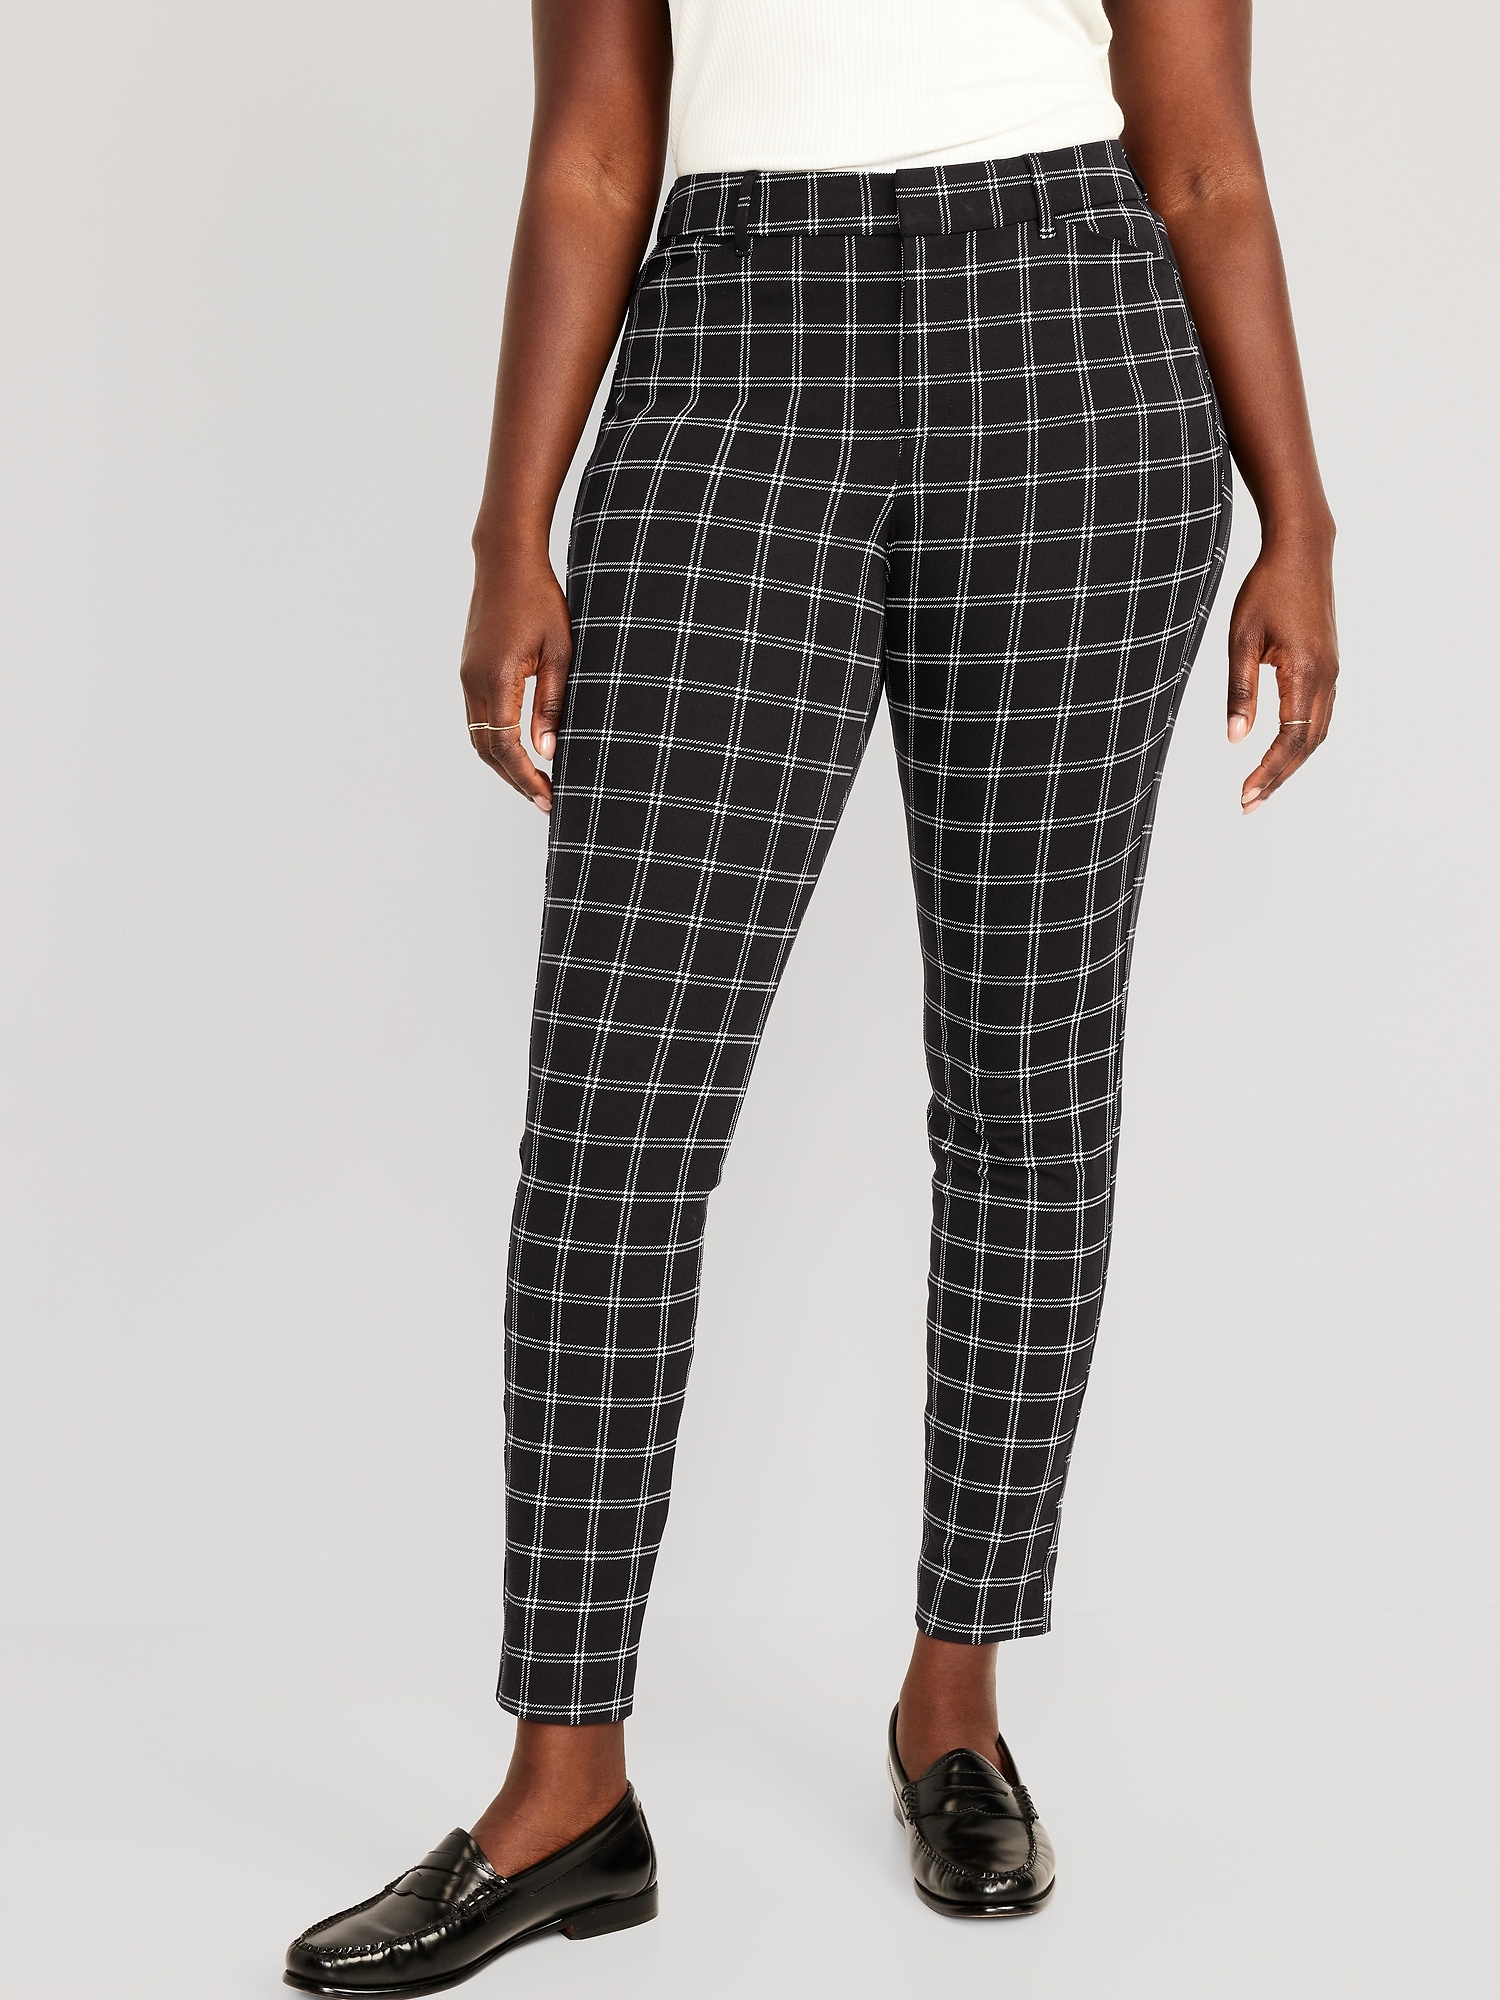 High-Waisted Pixie Straight Pants for Women | Old Navy